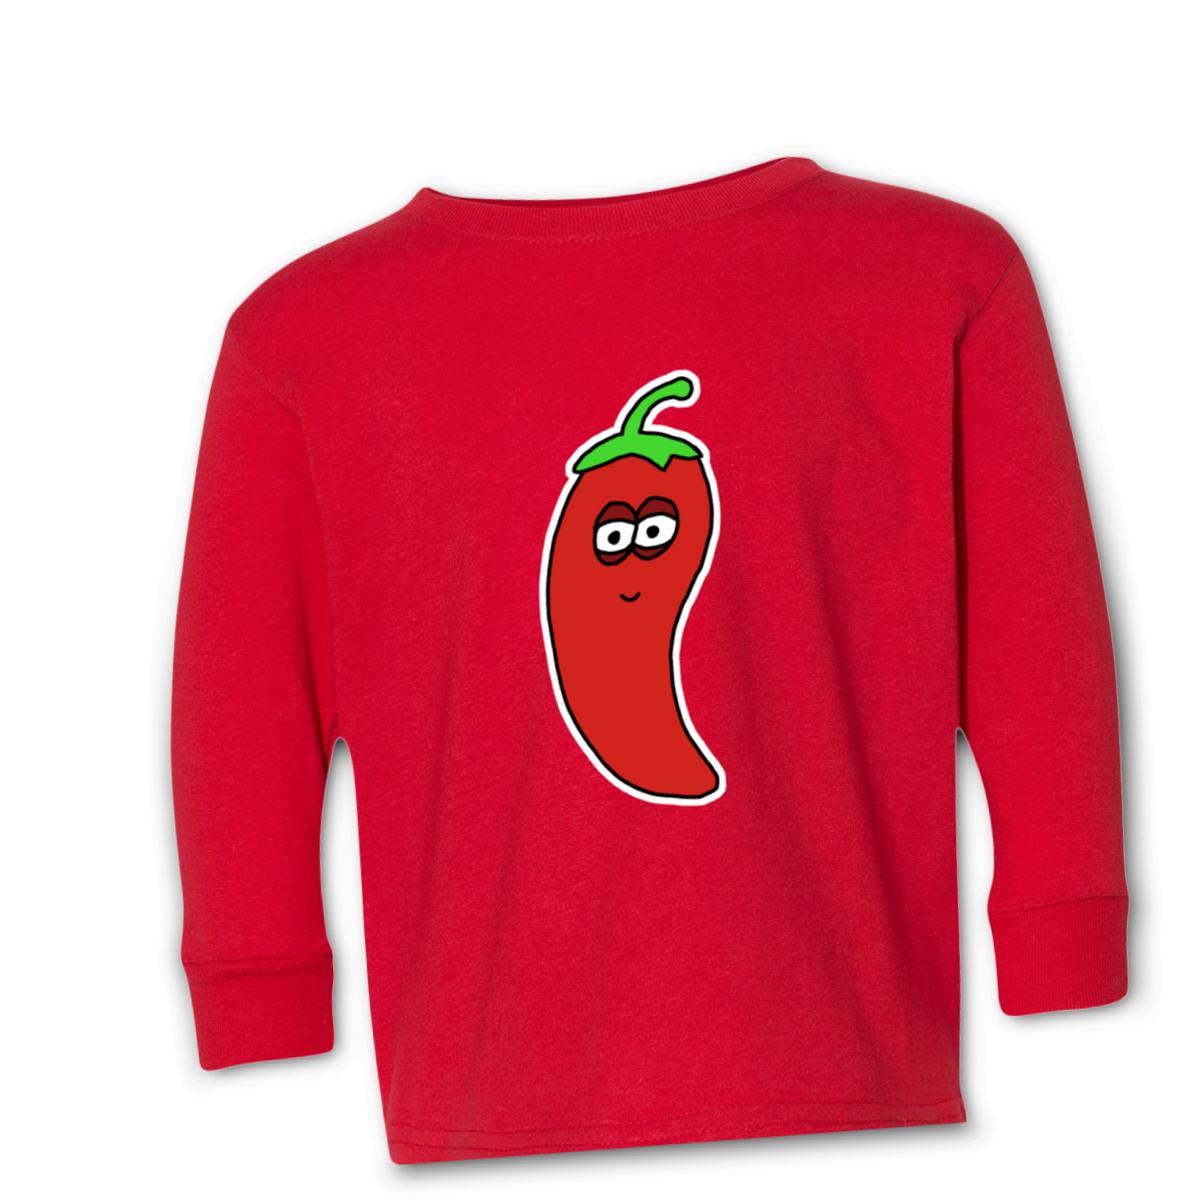 Chili Pepper Kid's Long Sleeve Tee Large red